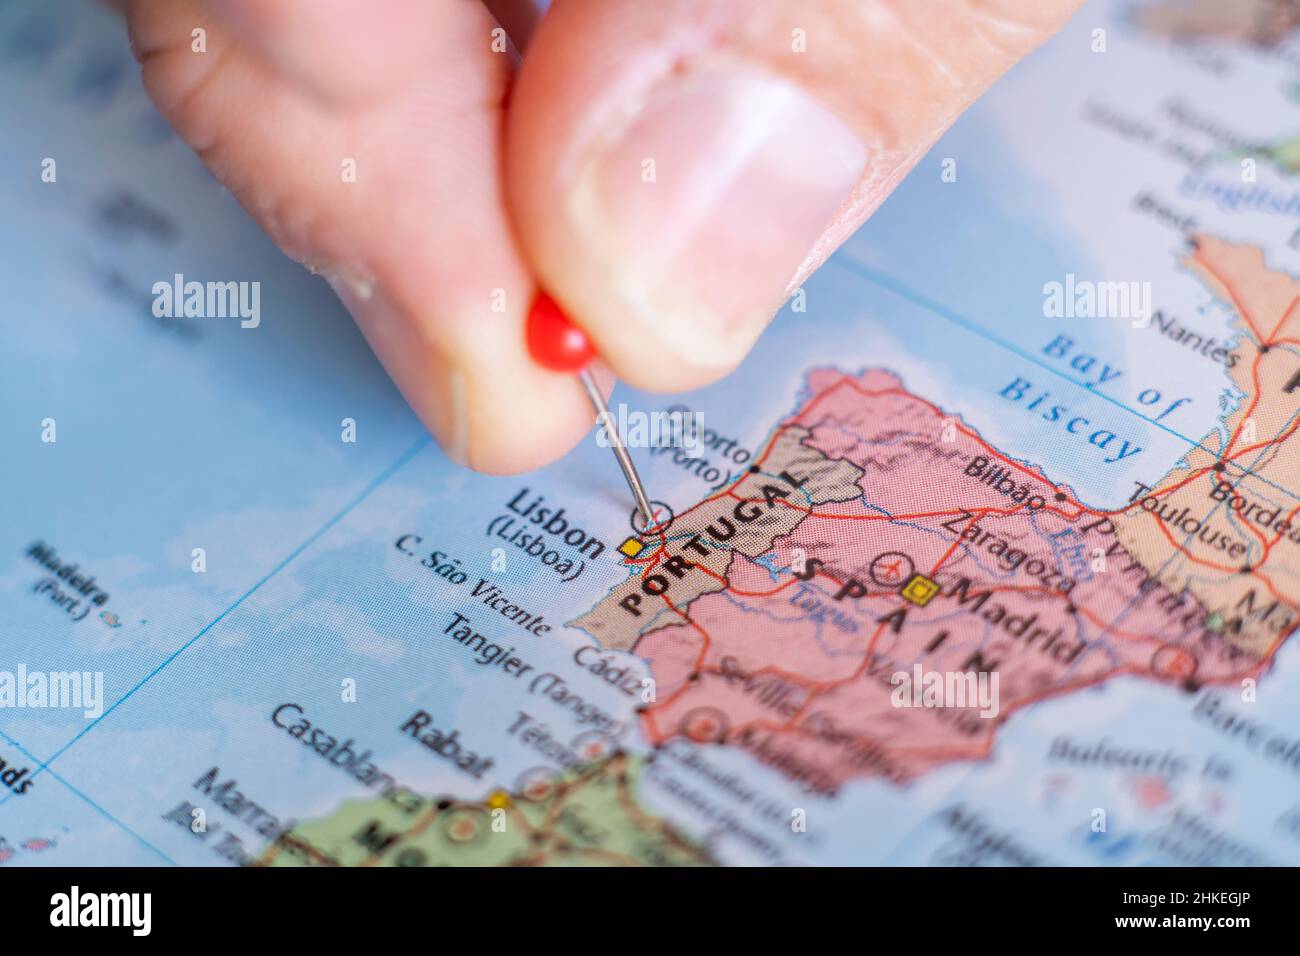 Portugal pin on a world map. Portugal travel destination planning pinned. Iberian Peninsula concept Stock Photo